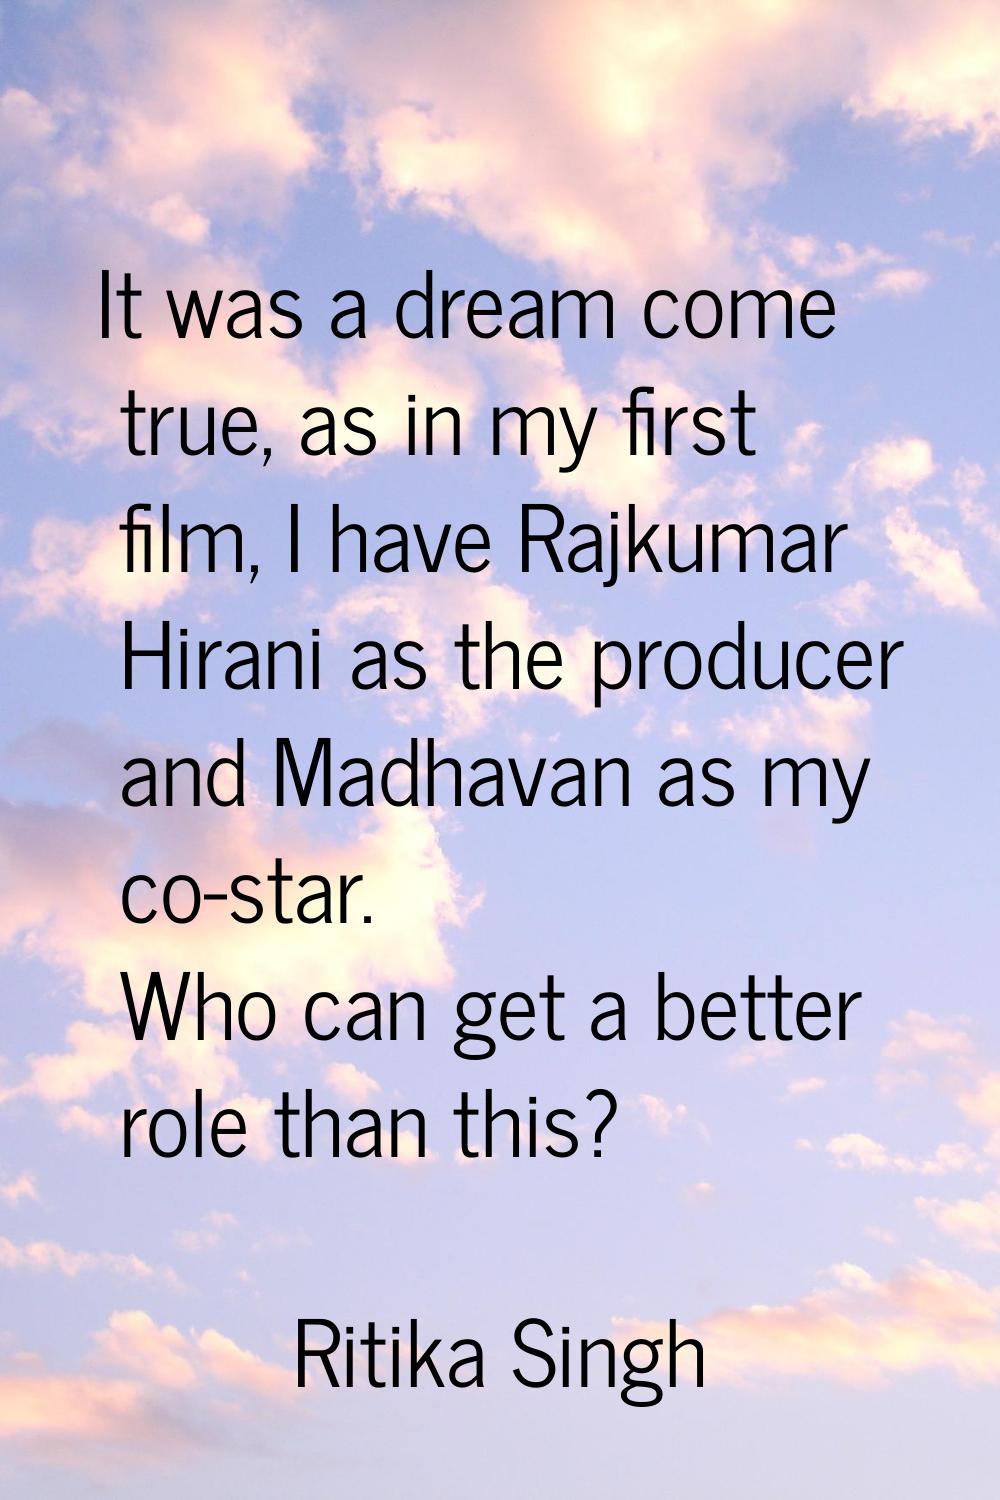 It was a dream come true, as in my first film, I have Rajkumar Hirani as the producer and Madhavan 